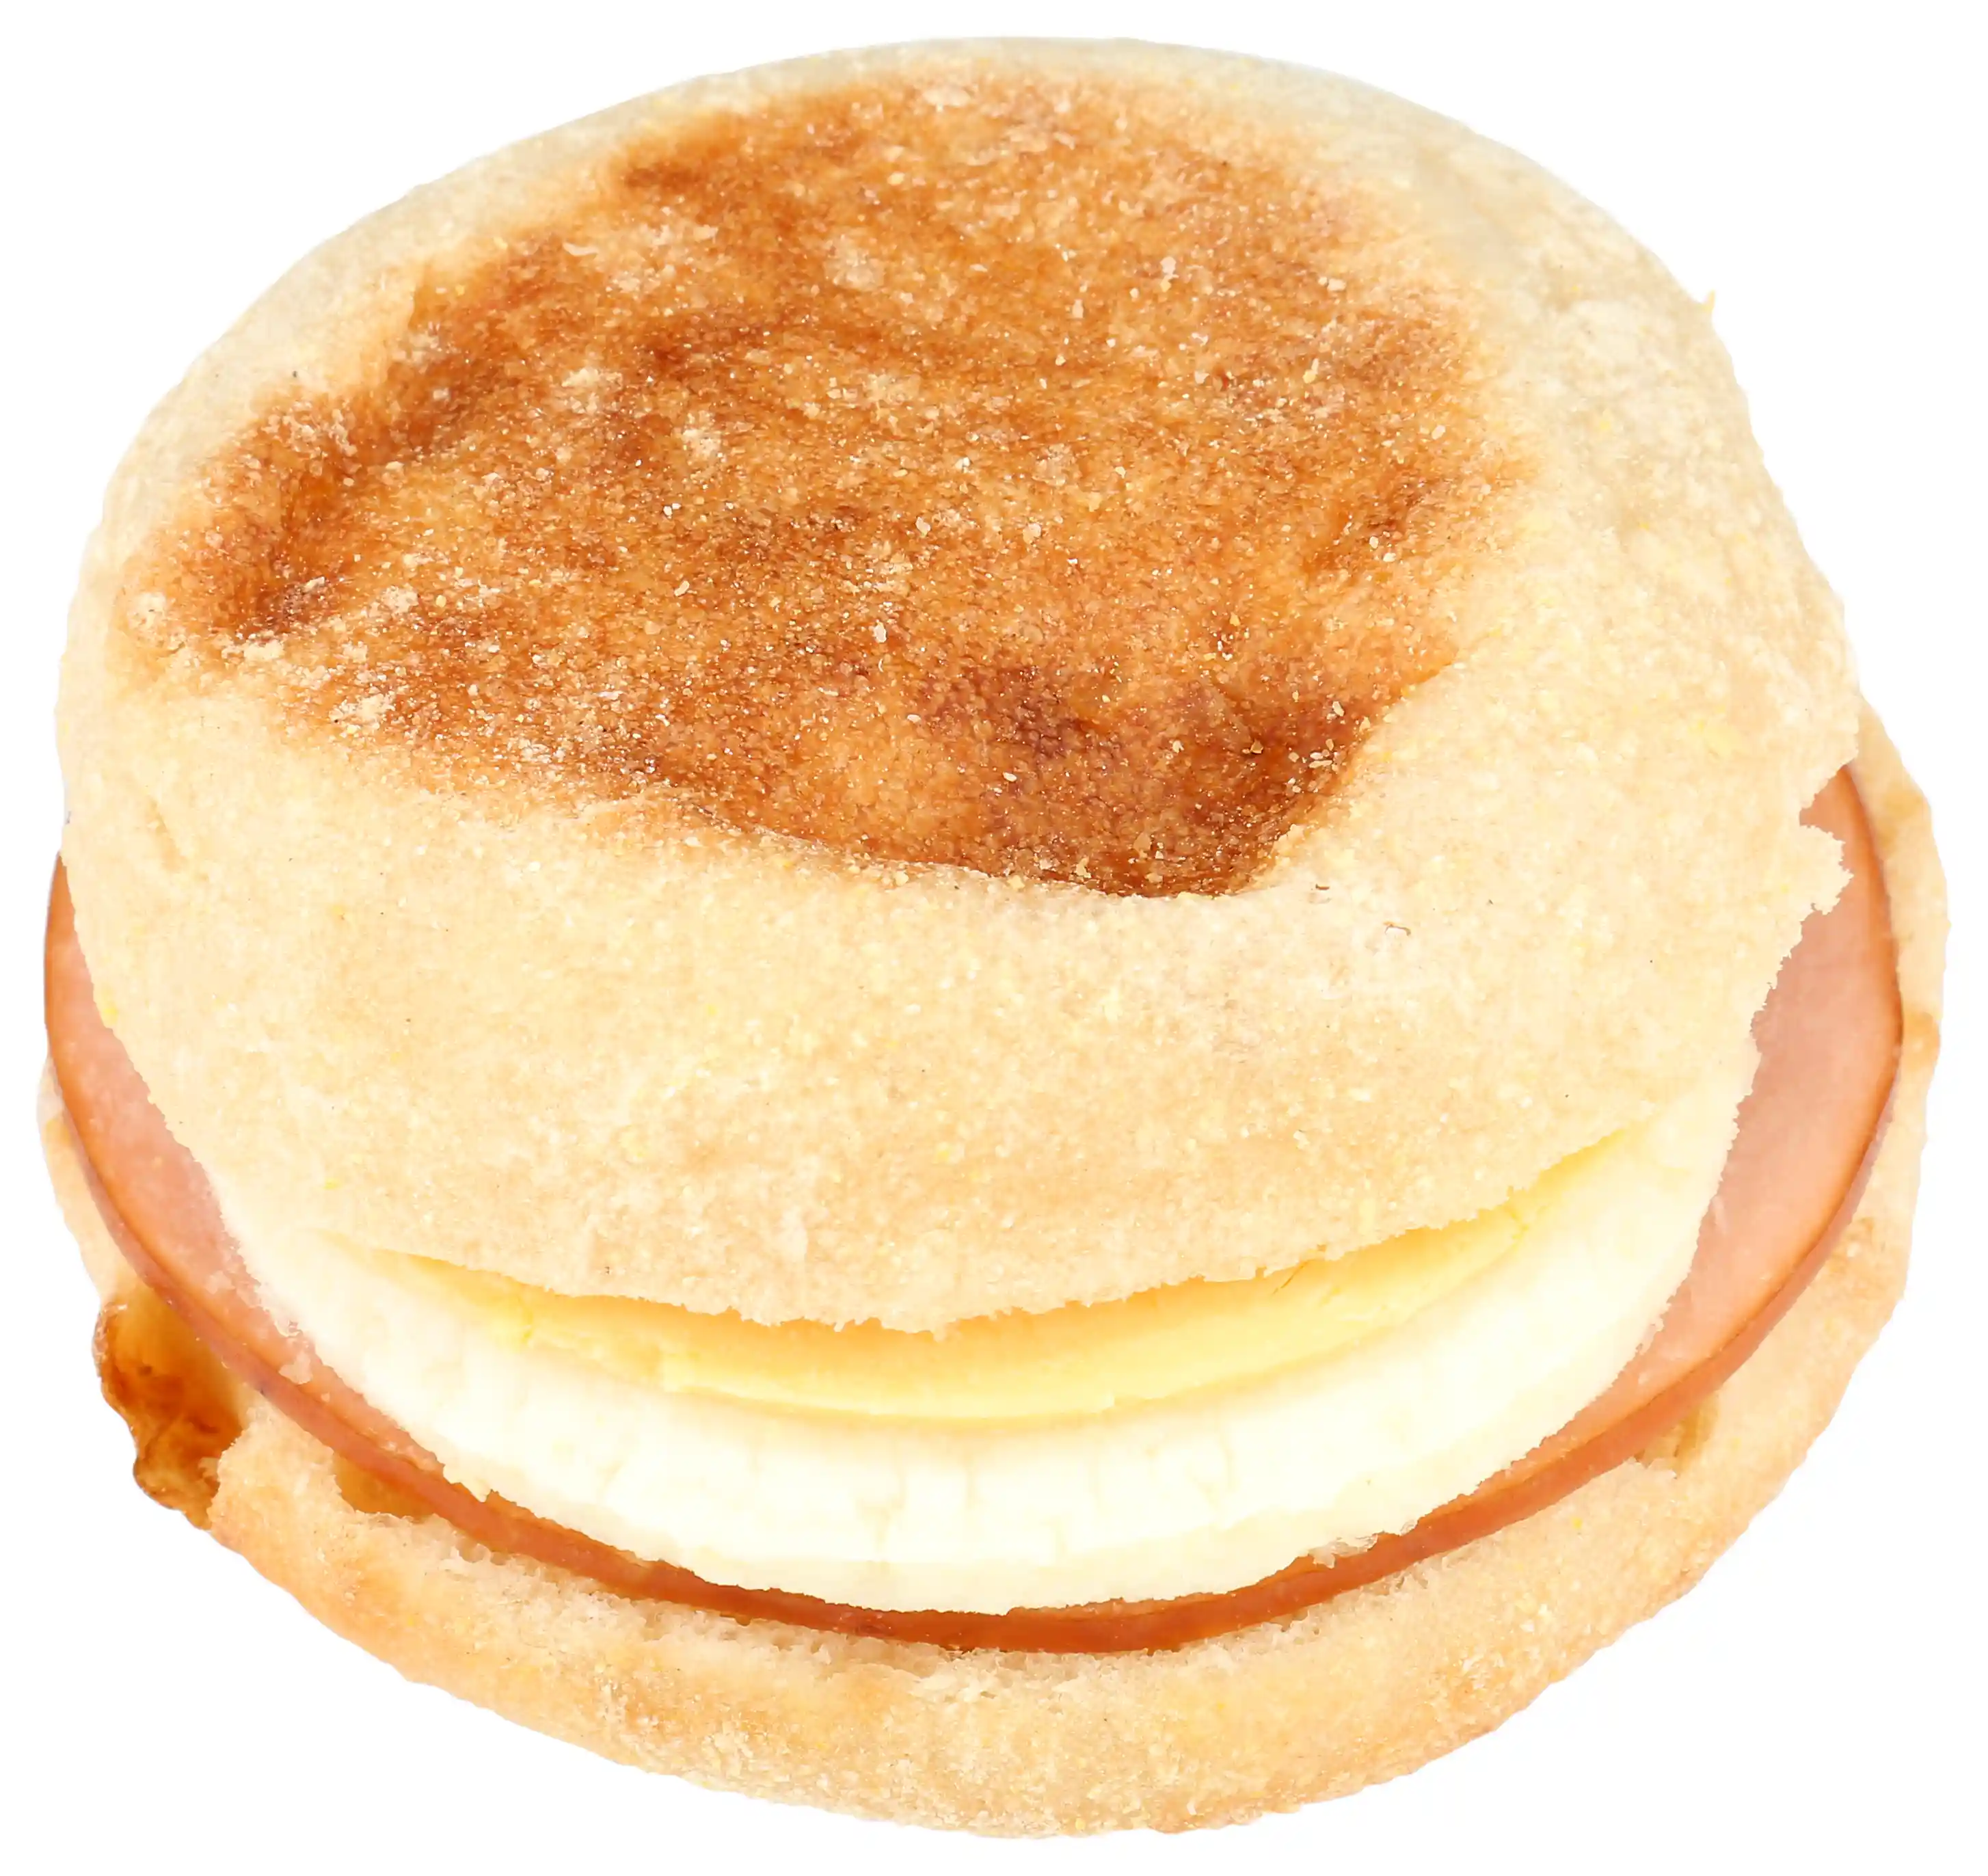 Jimmy Dean Delights® Butcher Wrapped Canadian Bacon, Egg White & Cheese Whole Grain Muffinhttps://images.salsify.com/image/upload/s--0vmsjsqy--/q_25/w7yrdqe66fk2ydfckhoa.webp